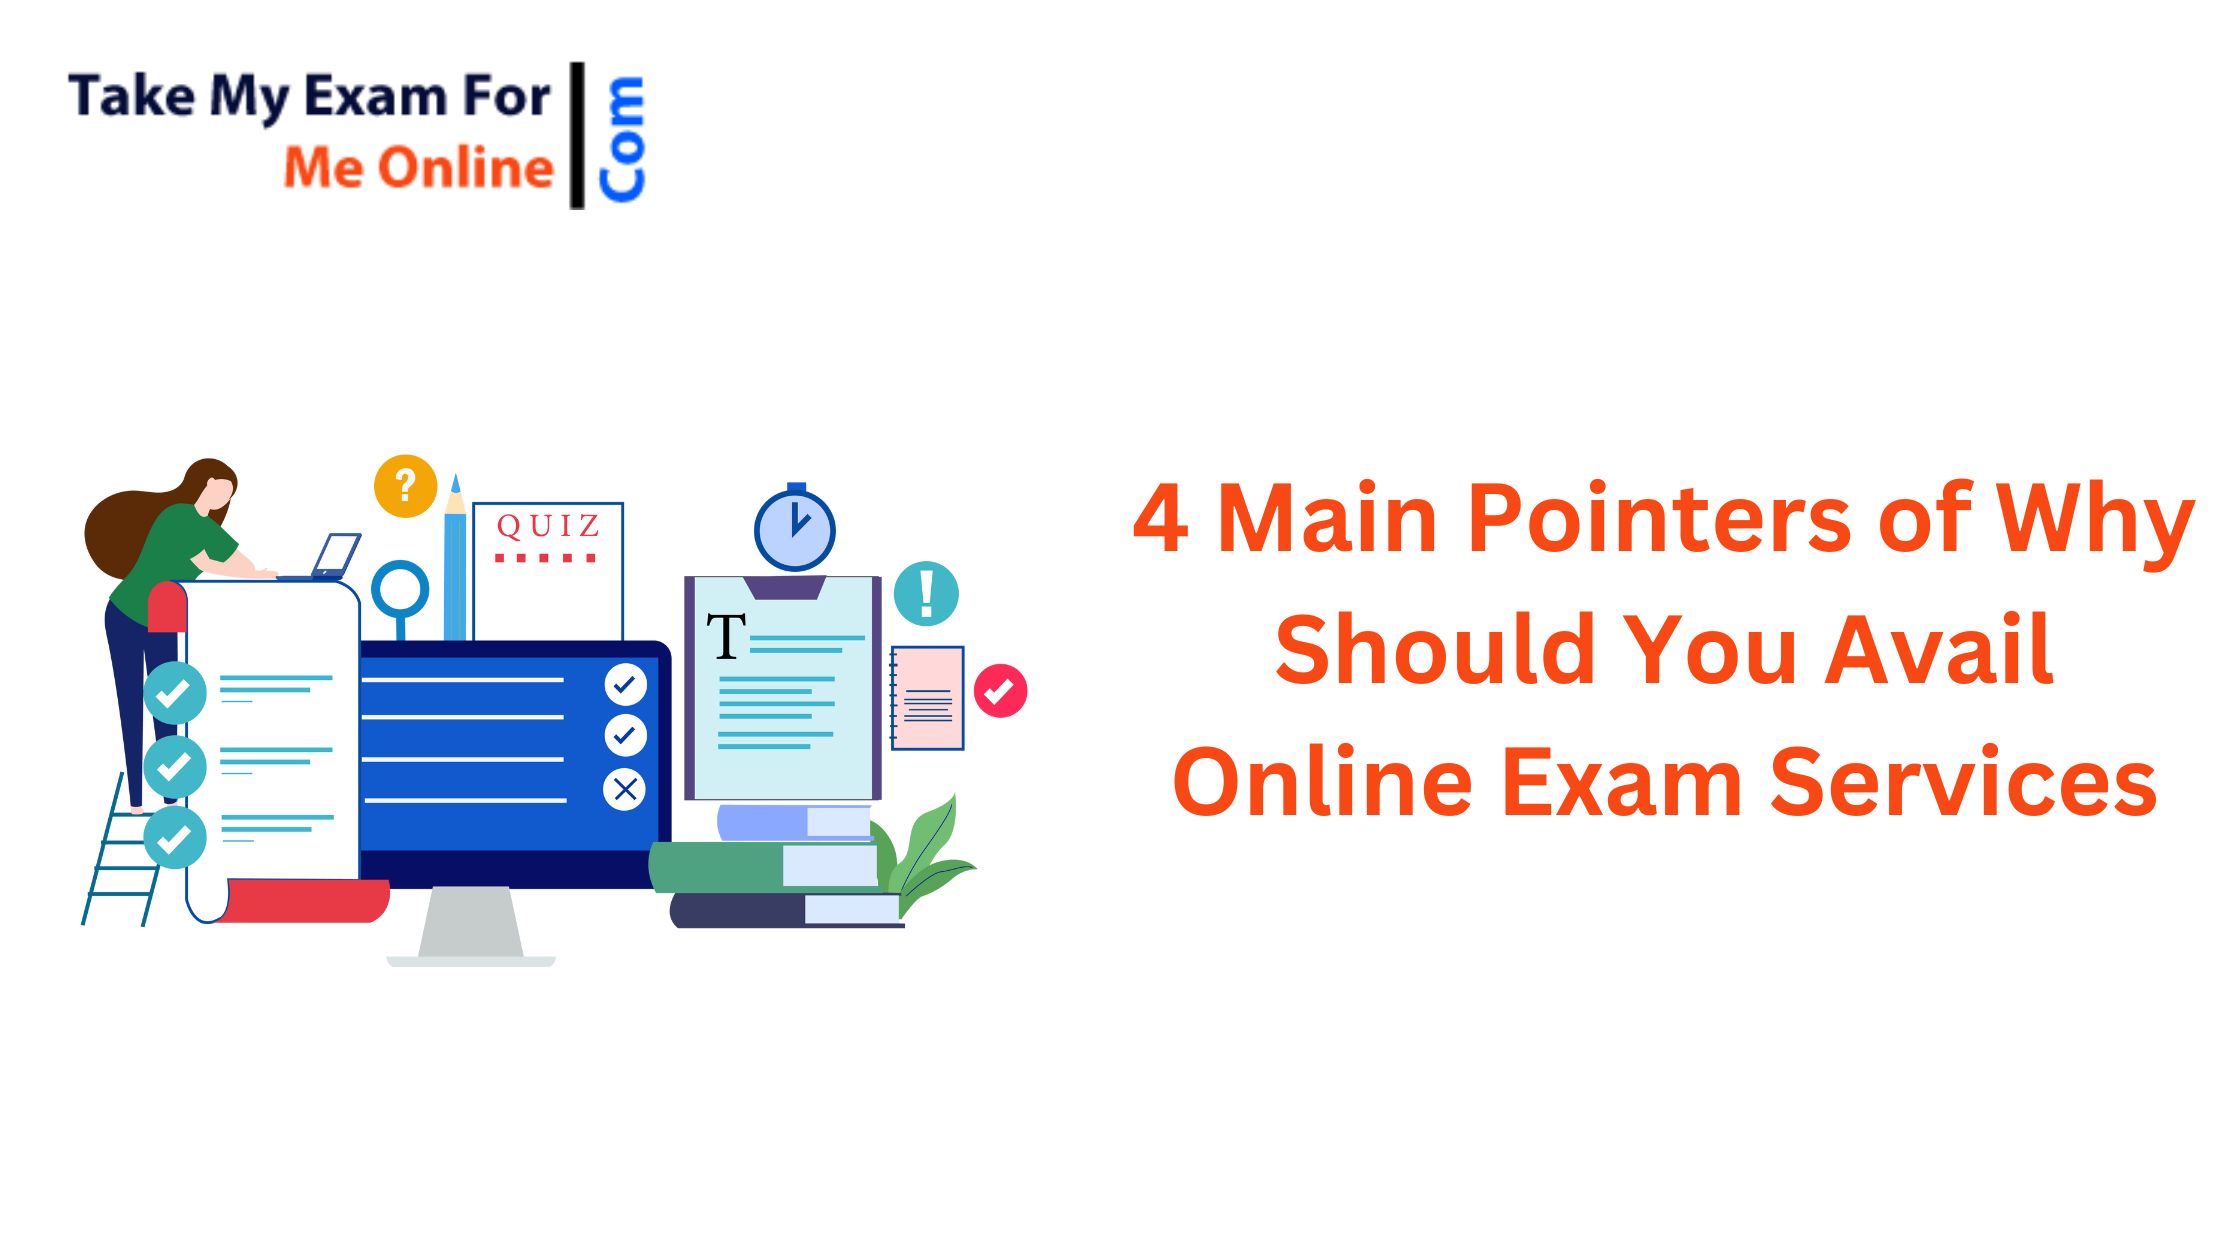 4 Main Pointers of Why Should You Avail Online Exam Services